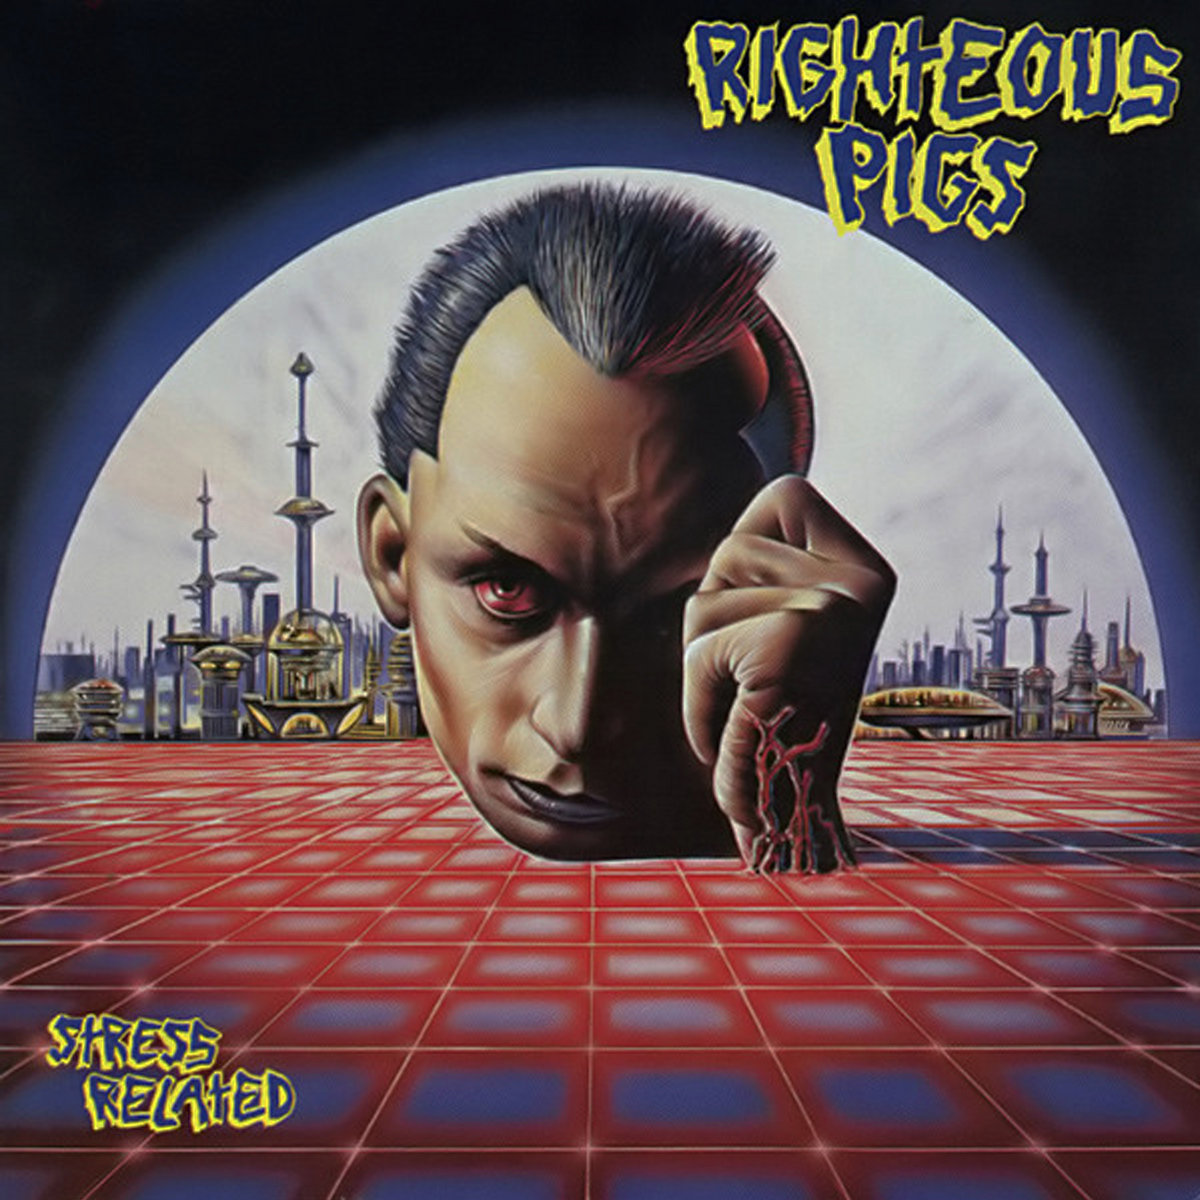 Stress Related | RIGHTEOUS PIGS | vicrecords